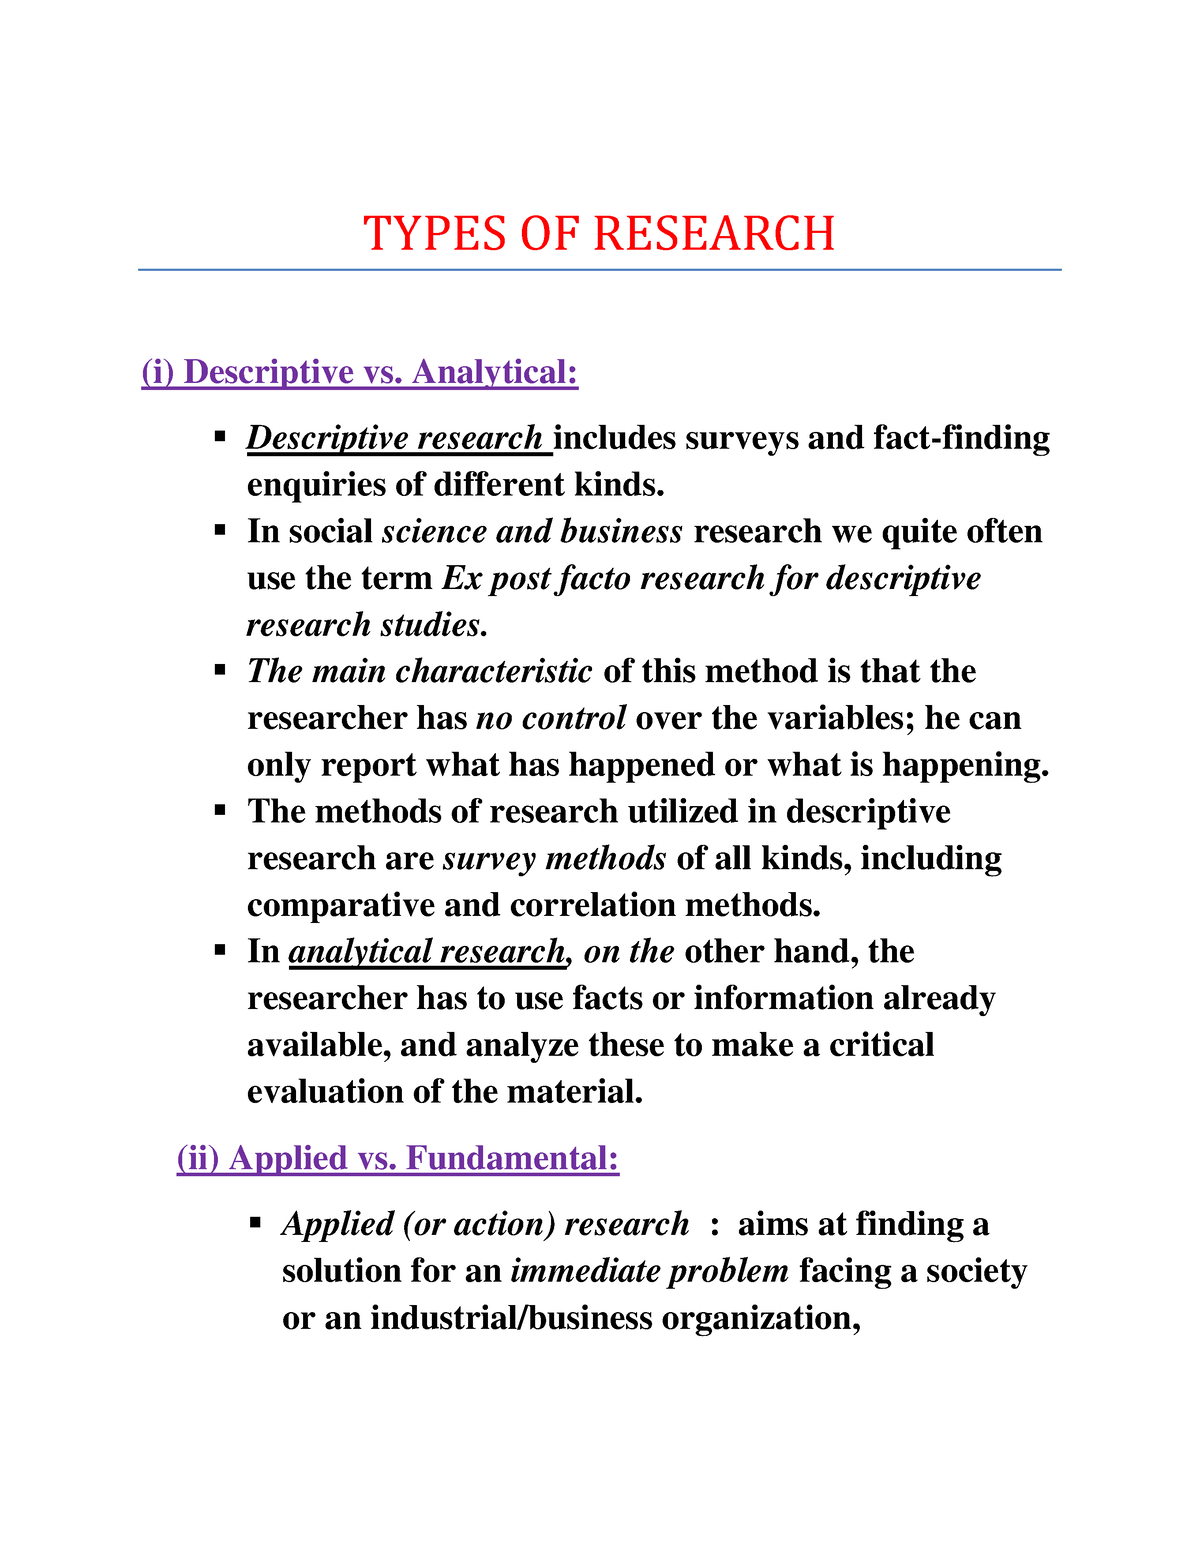 types of research descriptive vs analytical